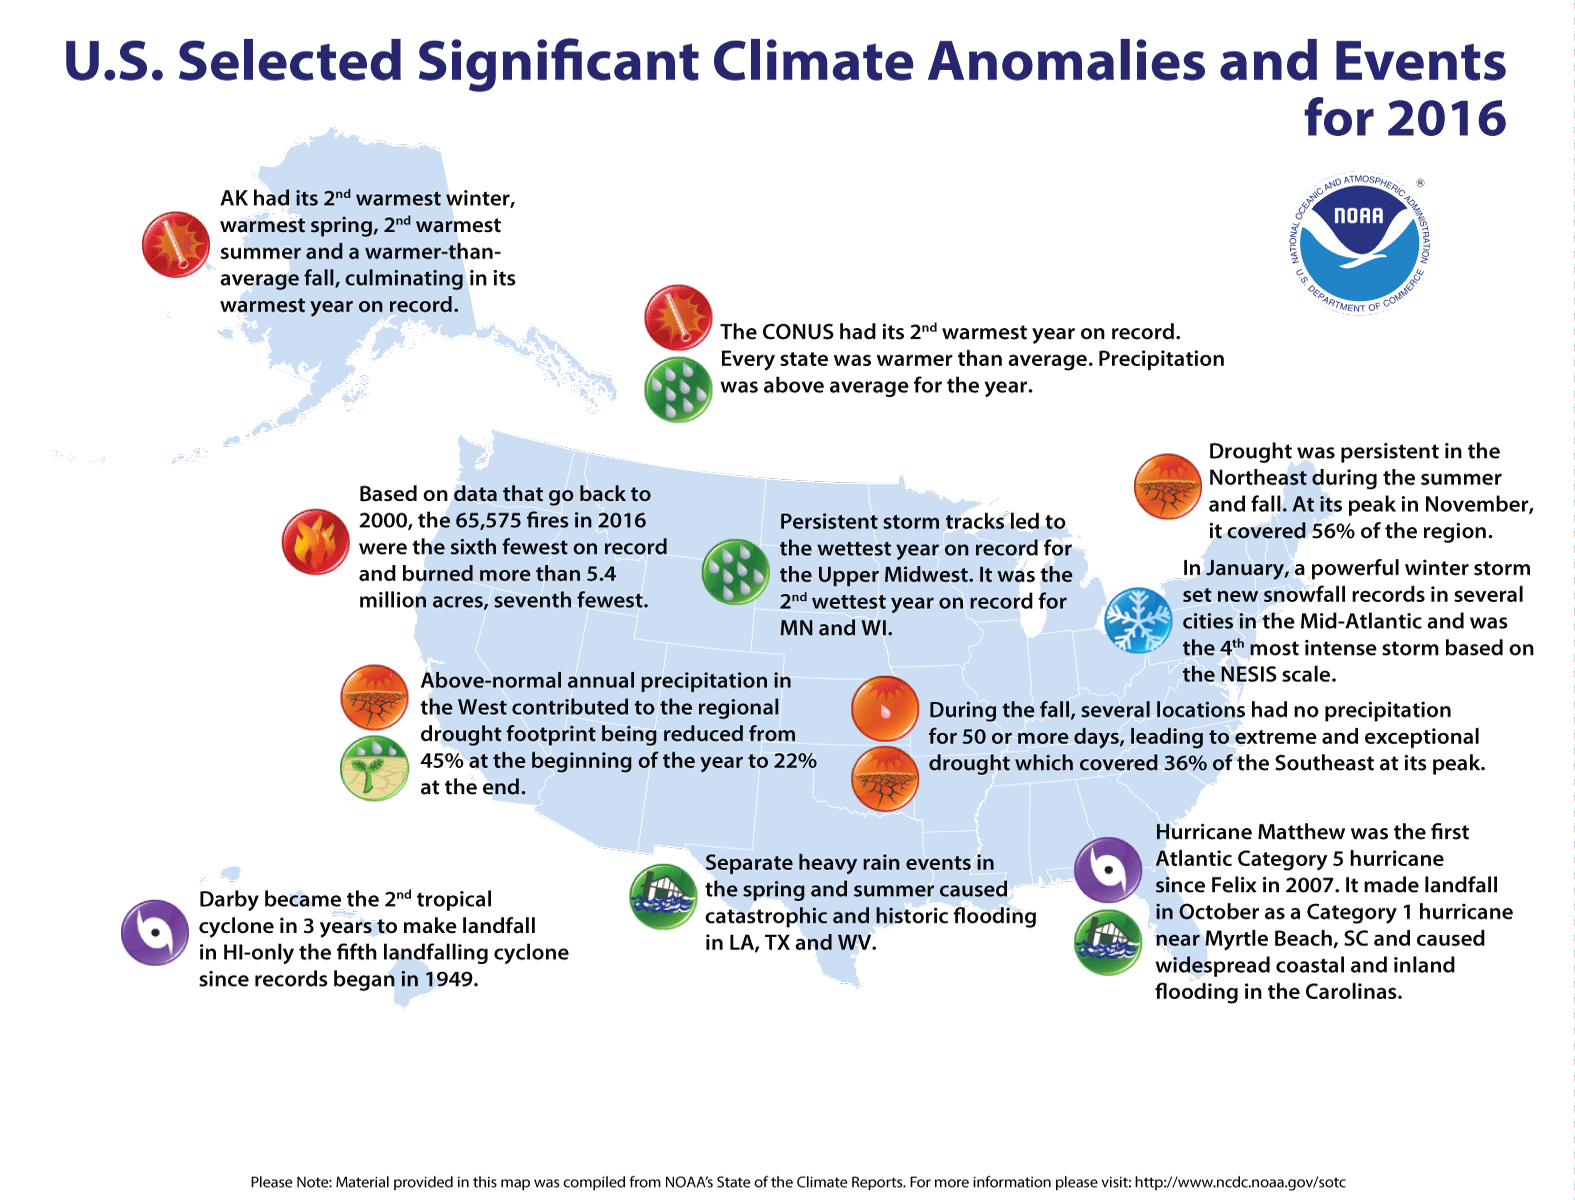 Significant U.S. Climate Events for 2016